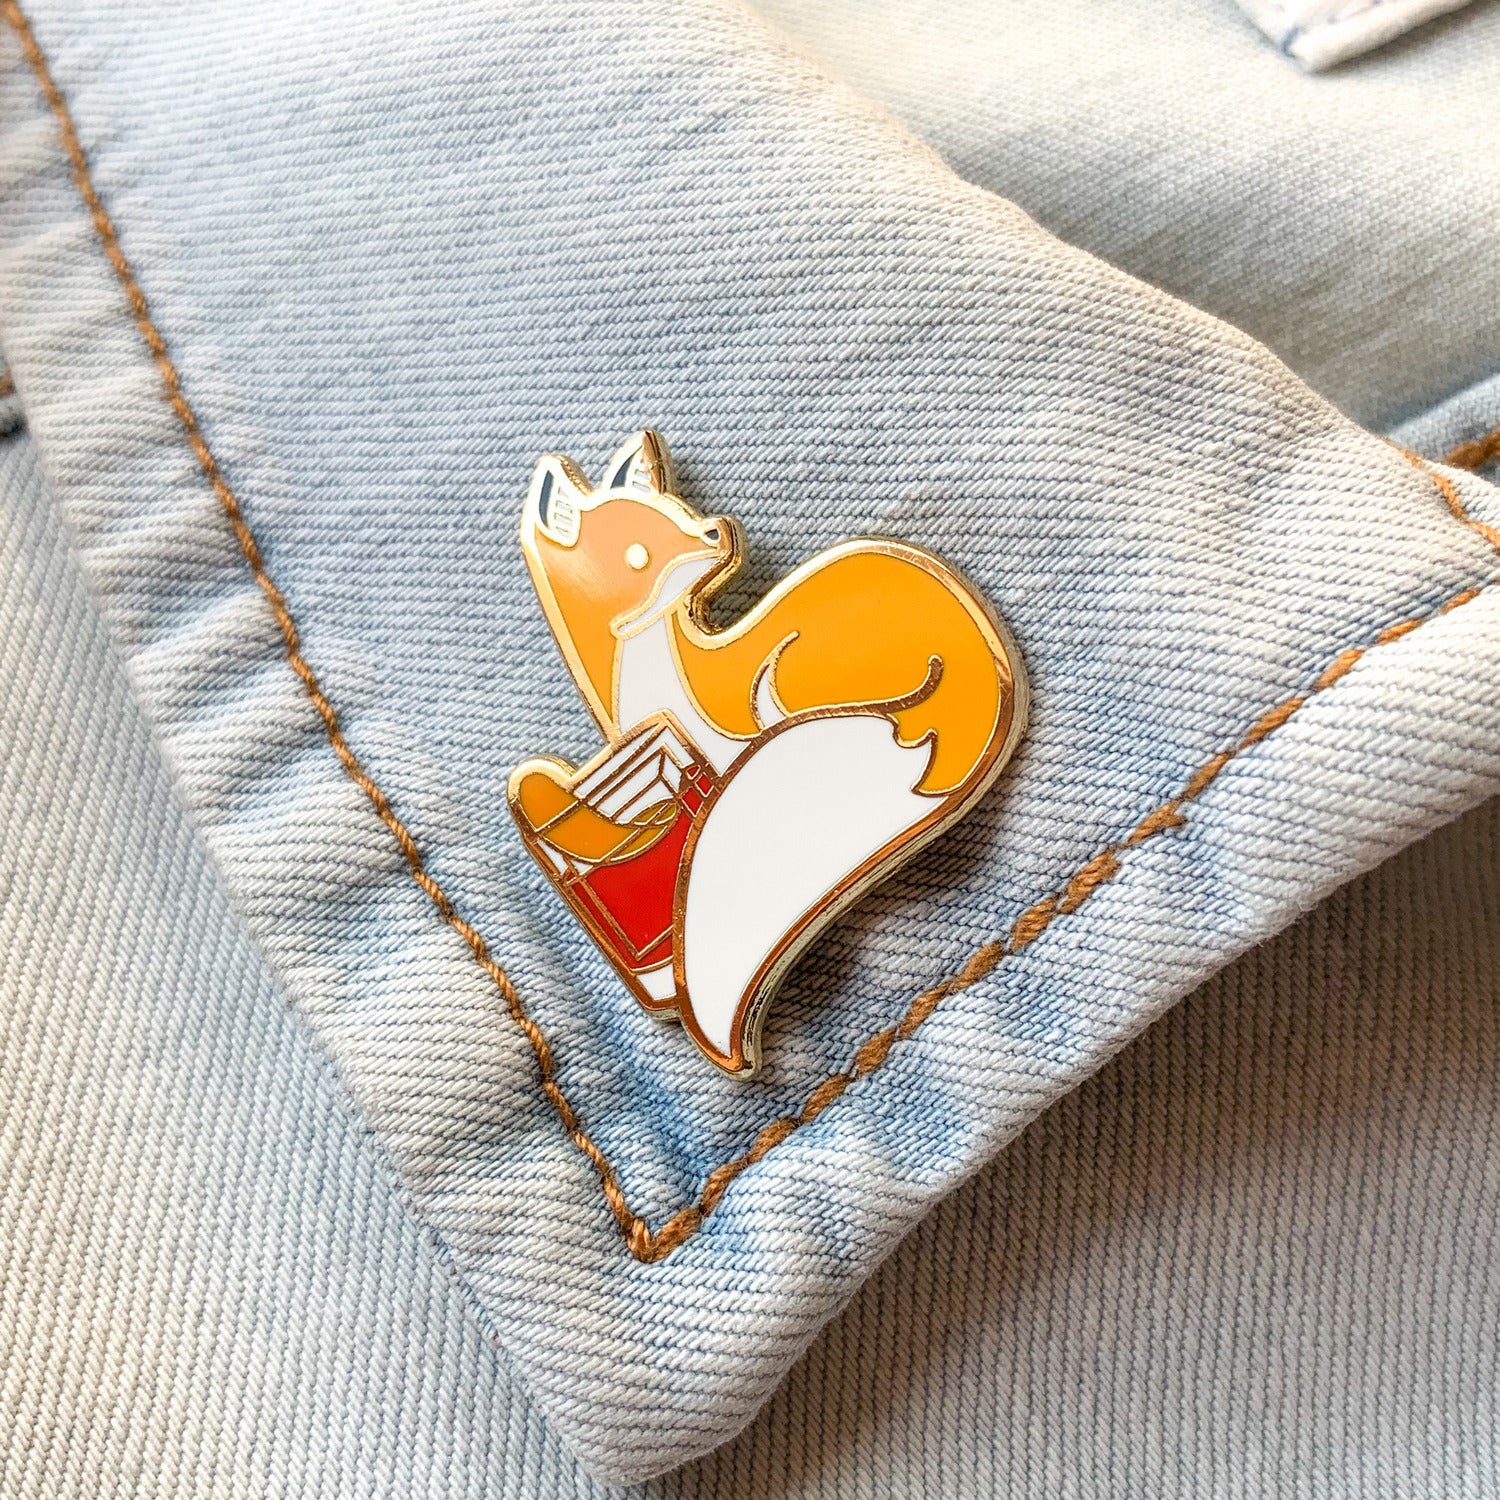 Fox and Negroni Cocktail Hard Enamel Pin by Cocktail Critters on Denim